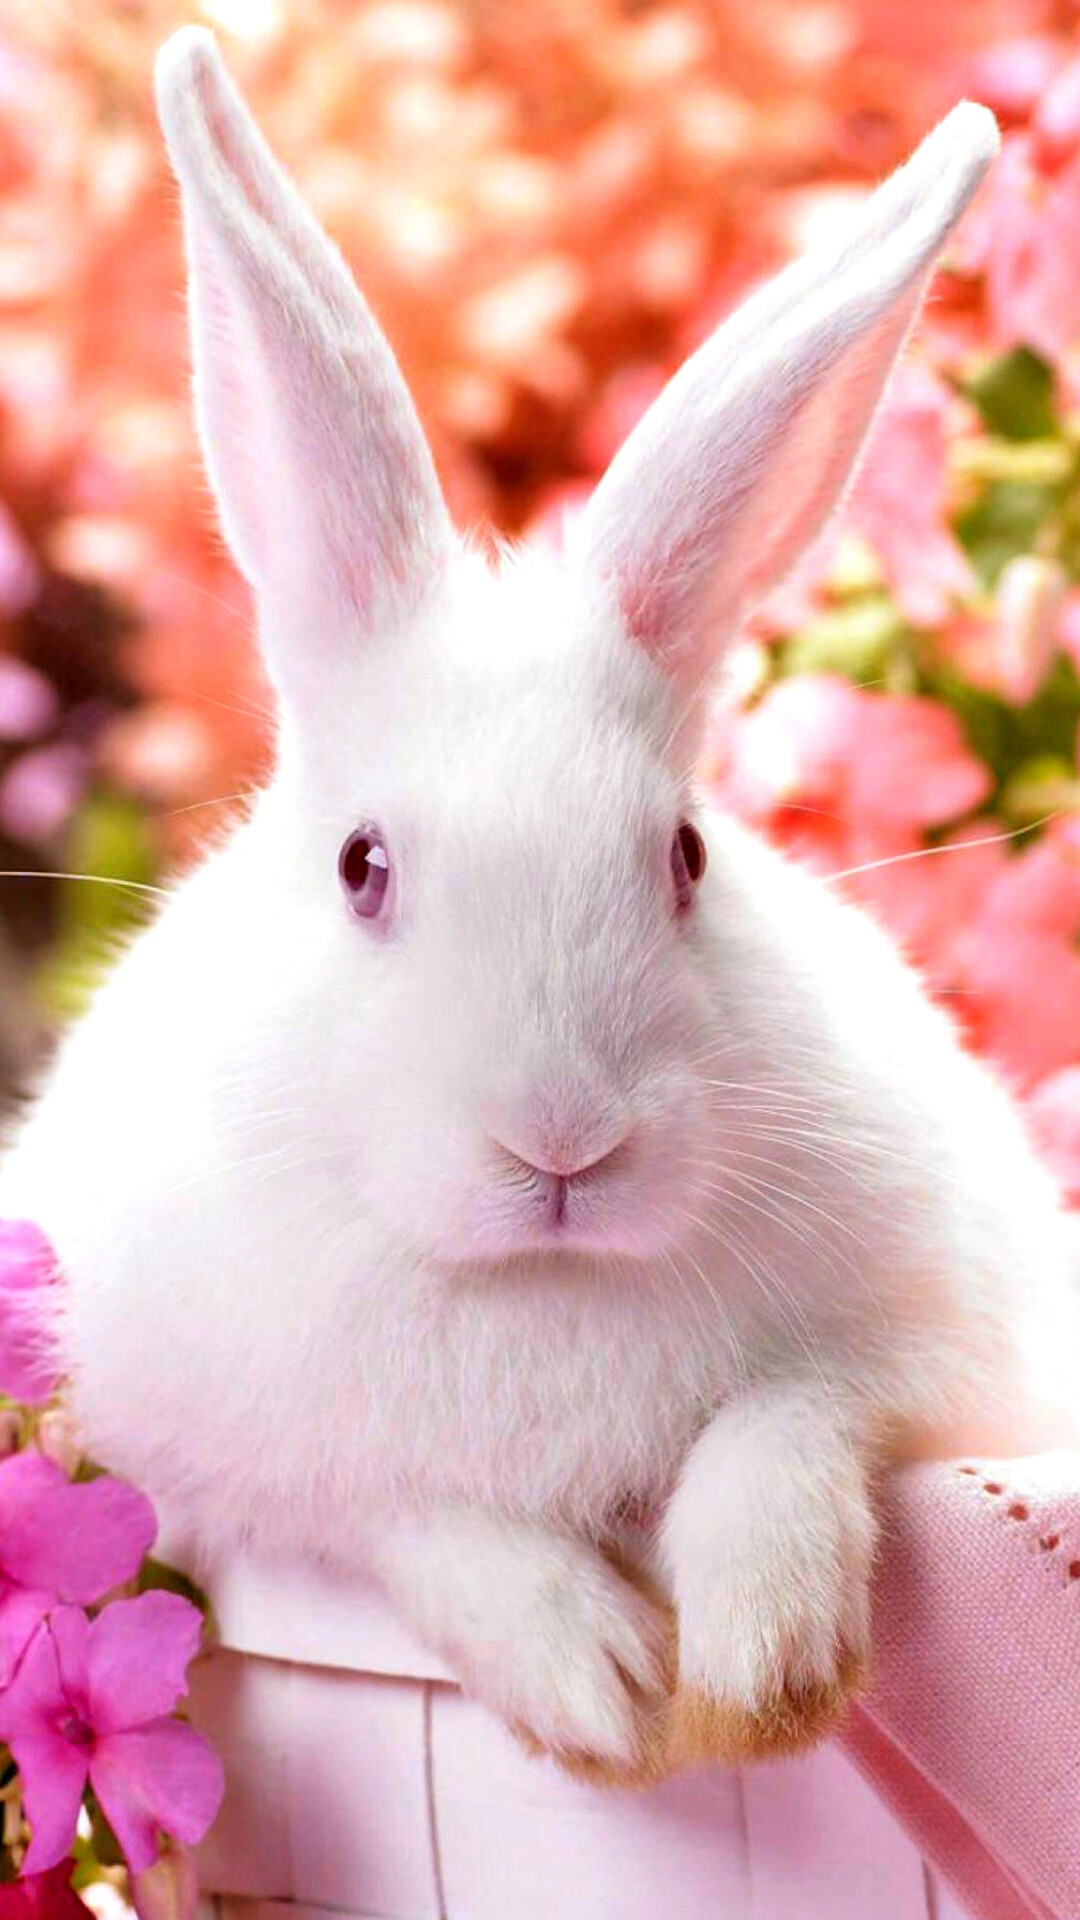 Rabbit: A small mammal, The family Leporidae. 1080x1920 Full HD Background.